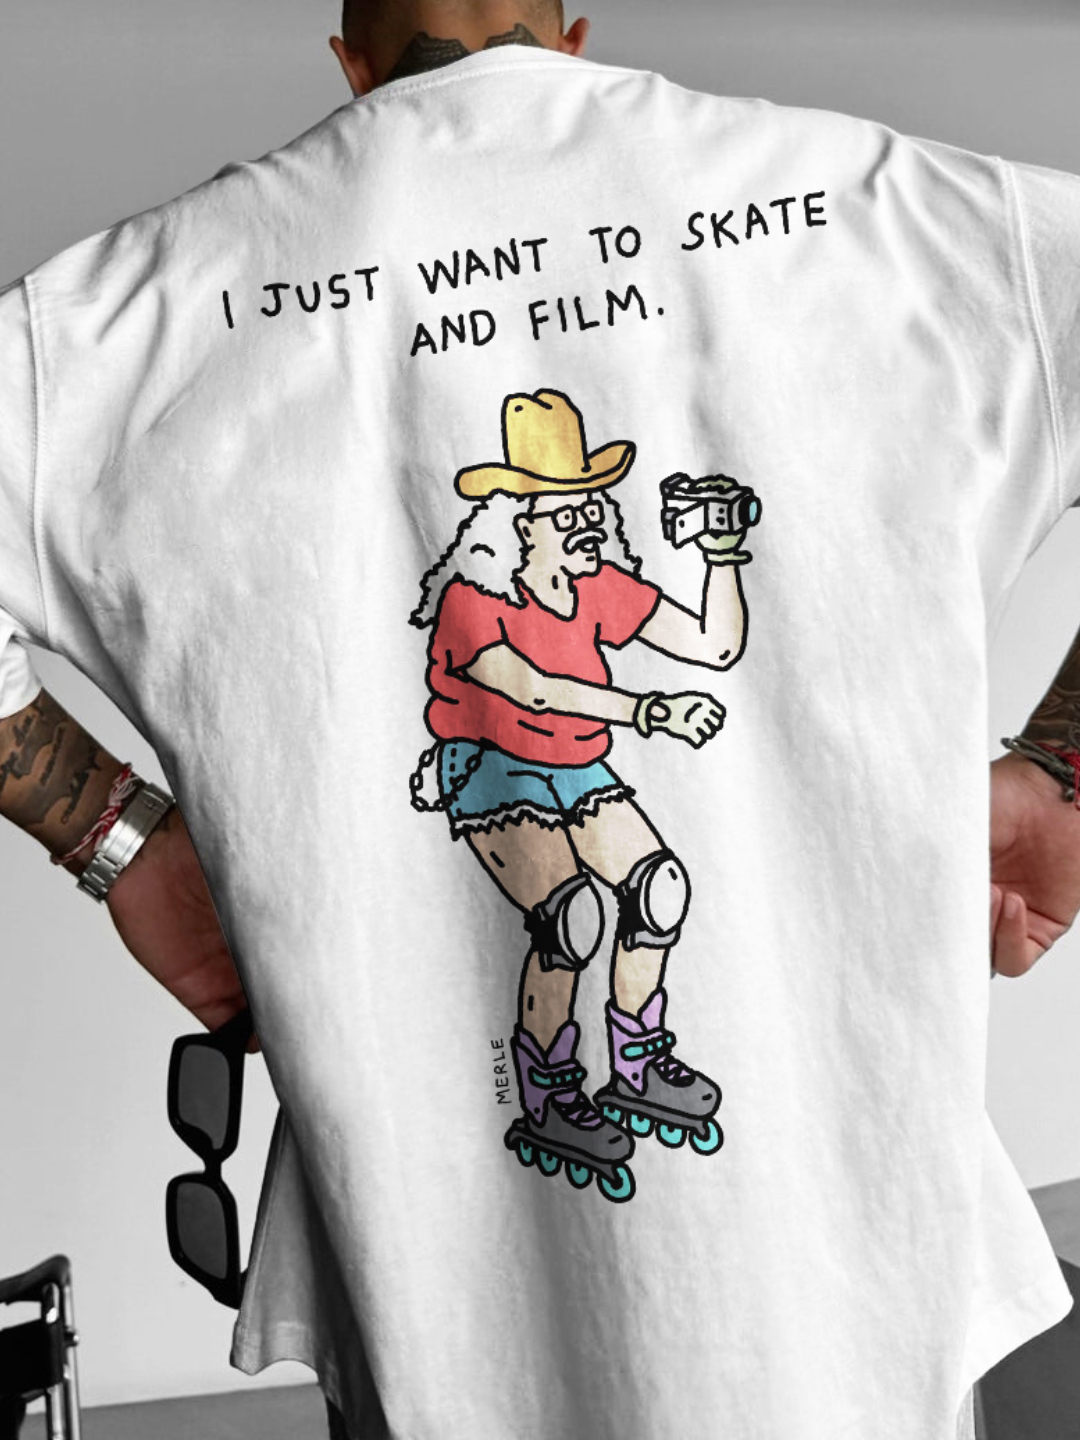 "I just want to skate and film." Skate T-shirt